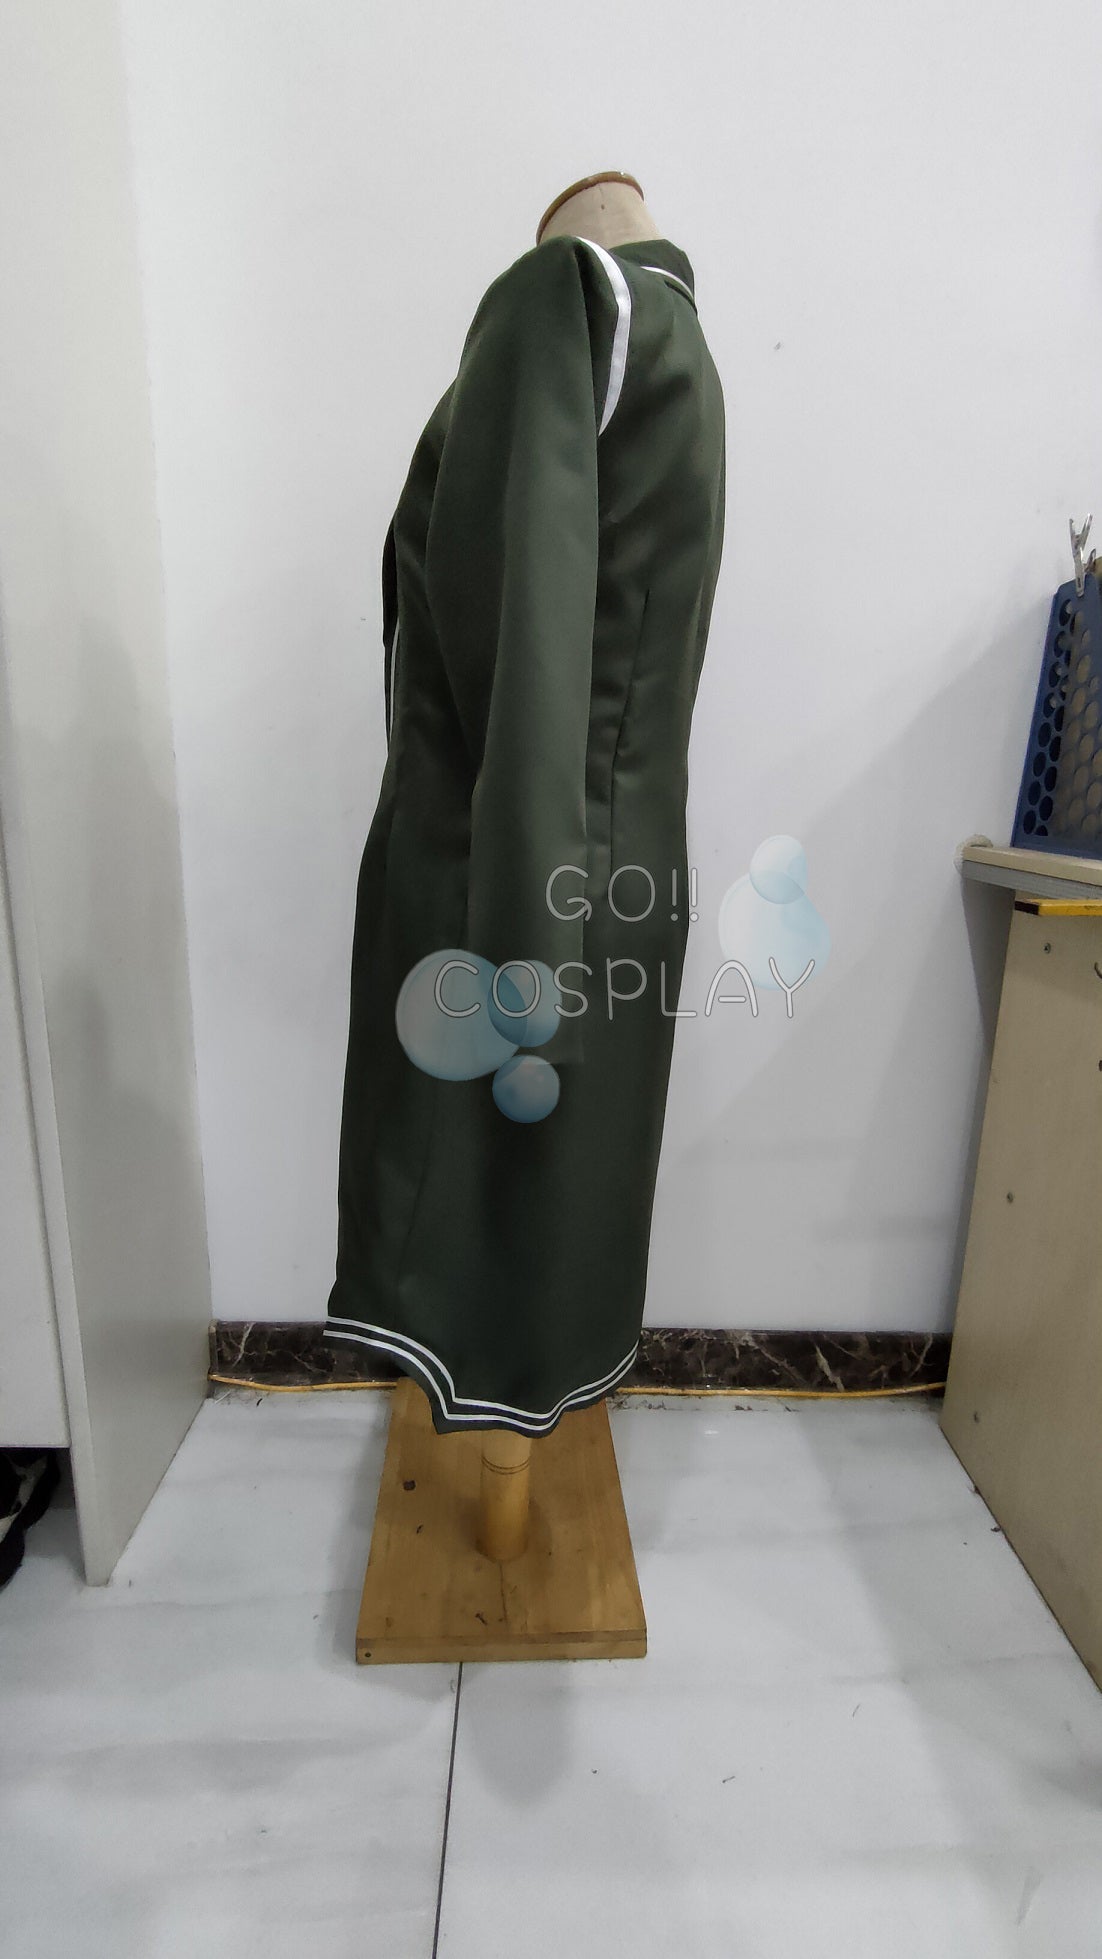 Netzach Library of Ruina Cosplay for Sale